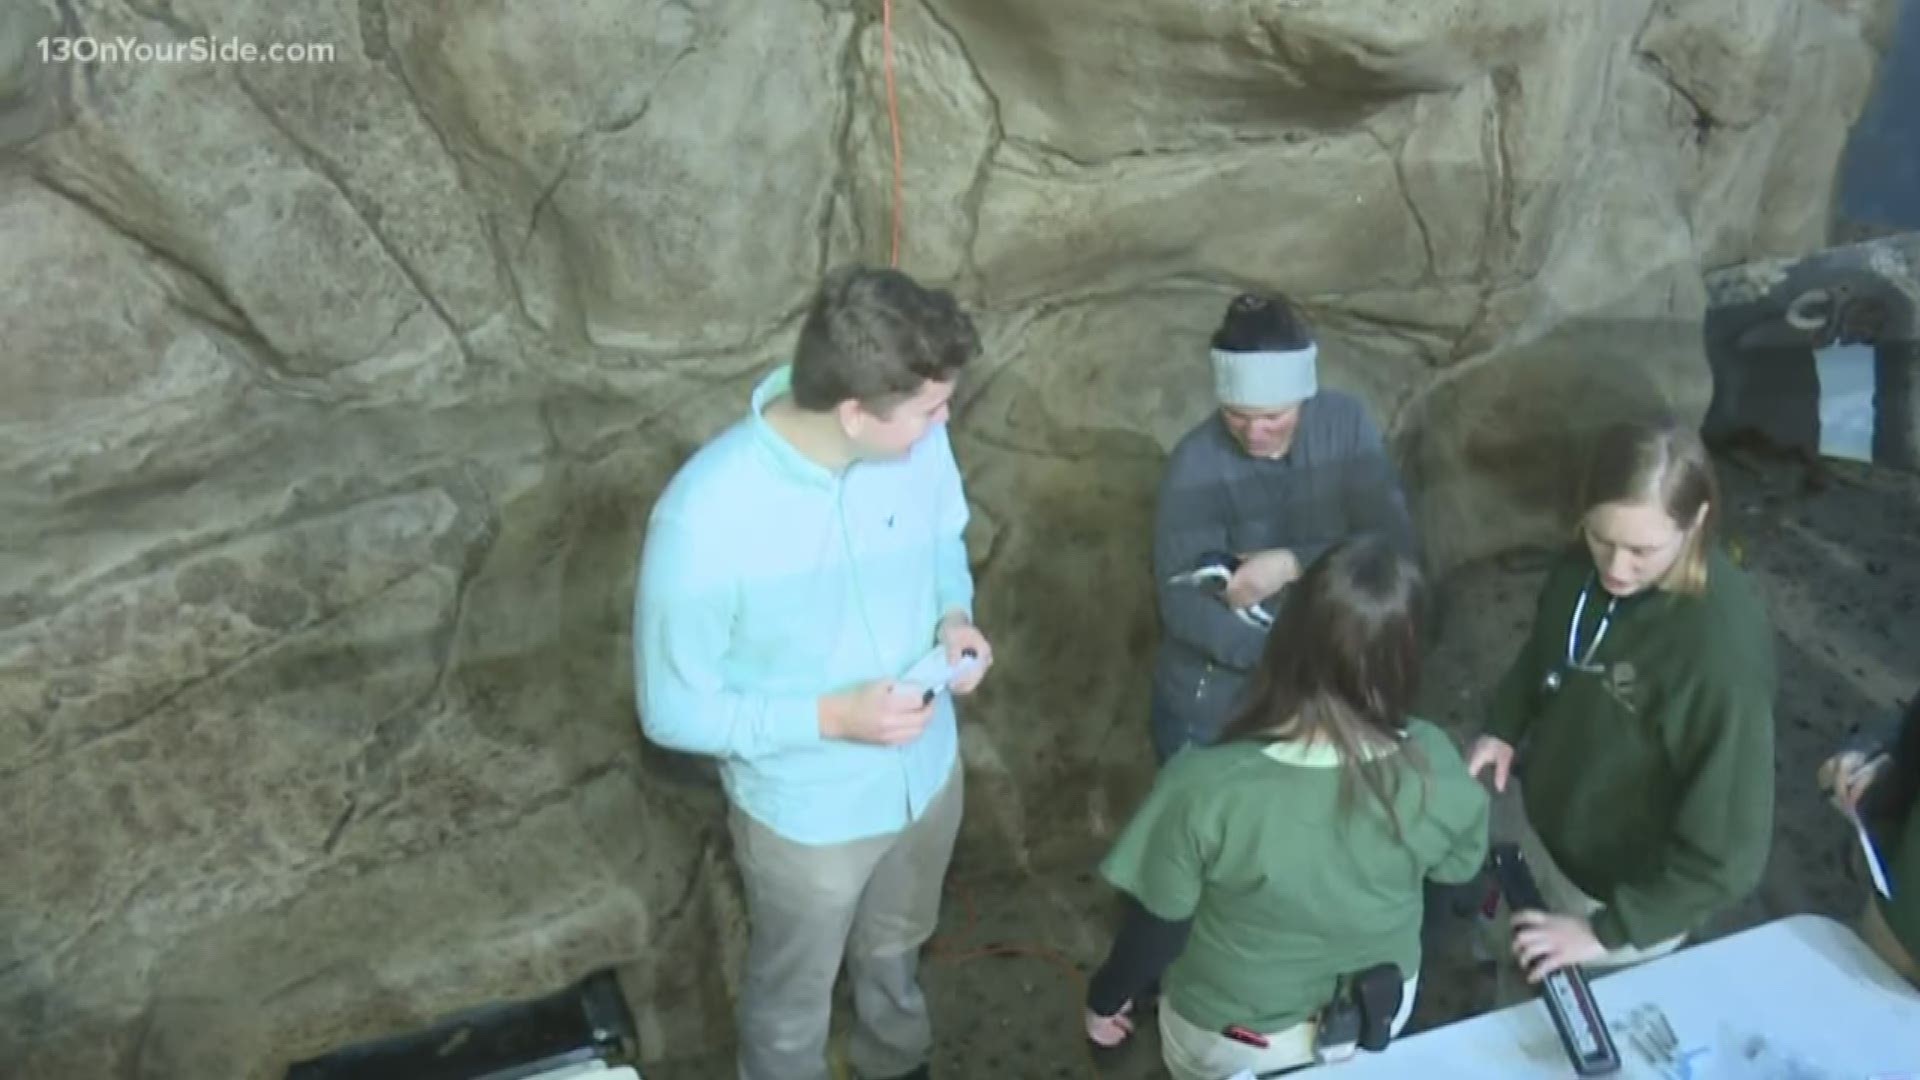 A zookeeper at the John Ball Zoo explains the process of examining the penguins in their exhibit.